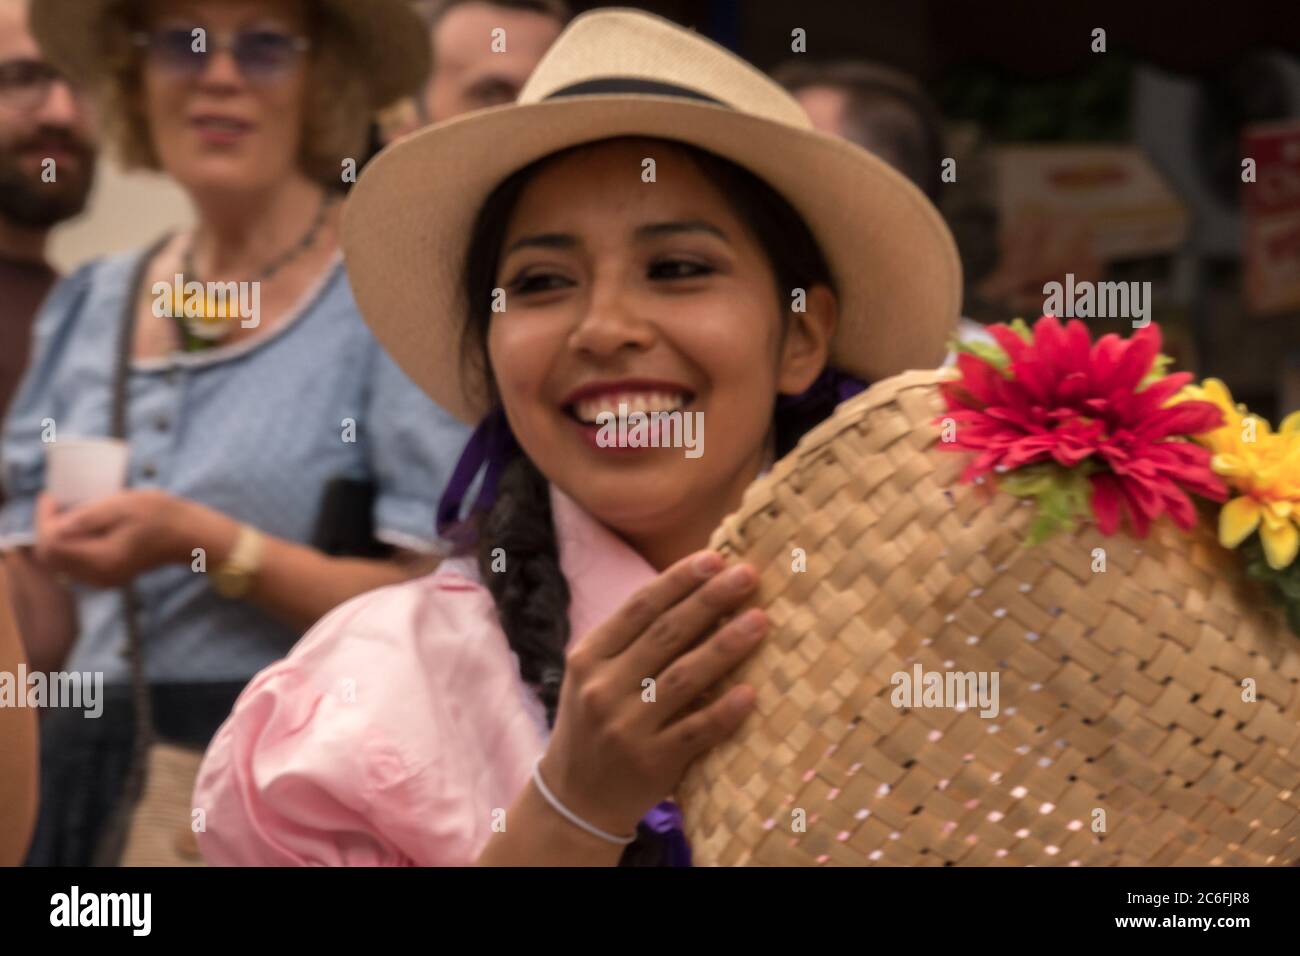 Villach, Austria - August 3th, 2019: A smiling lady from Ecuador at the Villacher Kirchtag, the largest traditional festival in Austria Stock Photo